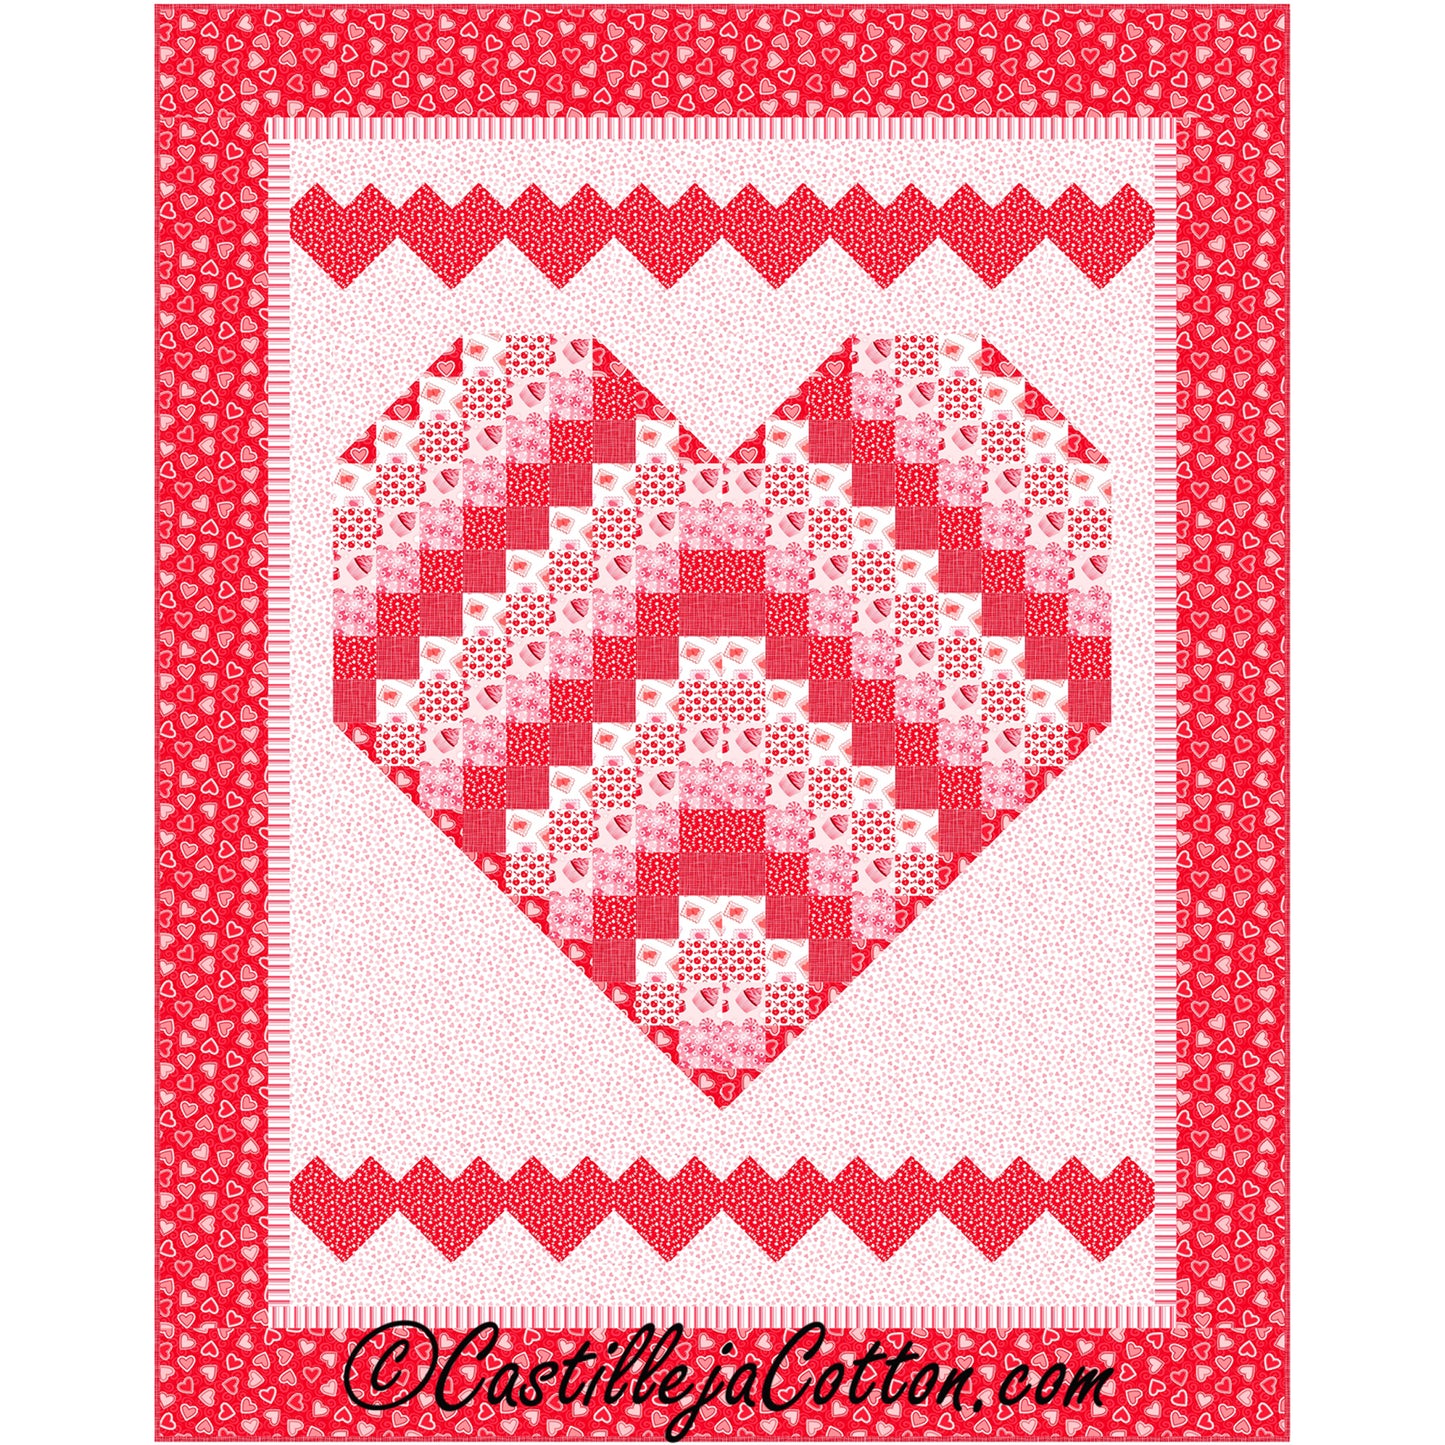 Patchwork red heart quilt with white border, perfect for cozying up on chilly nights.